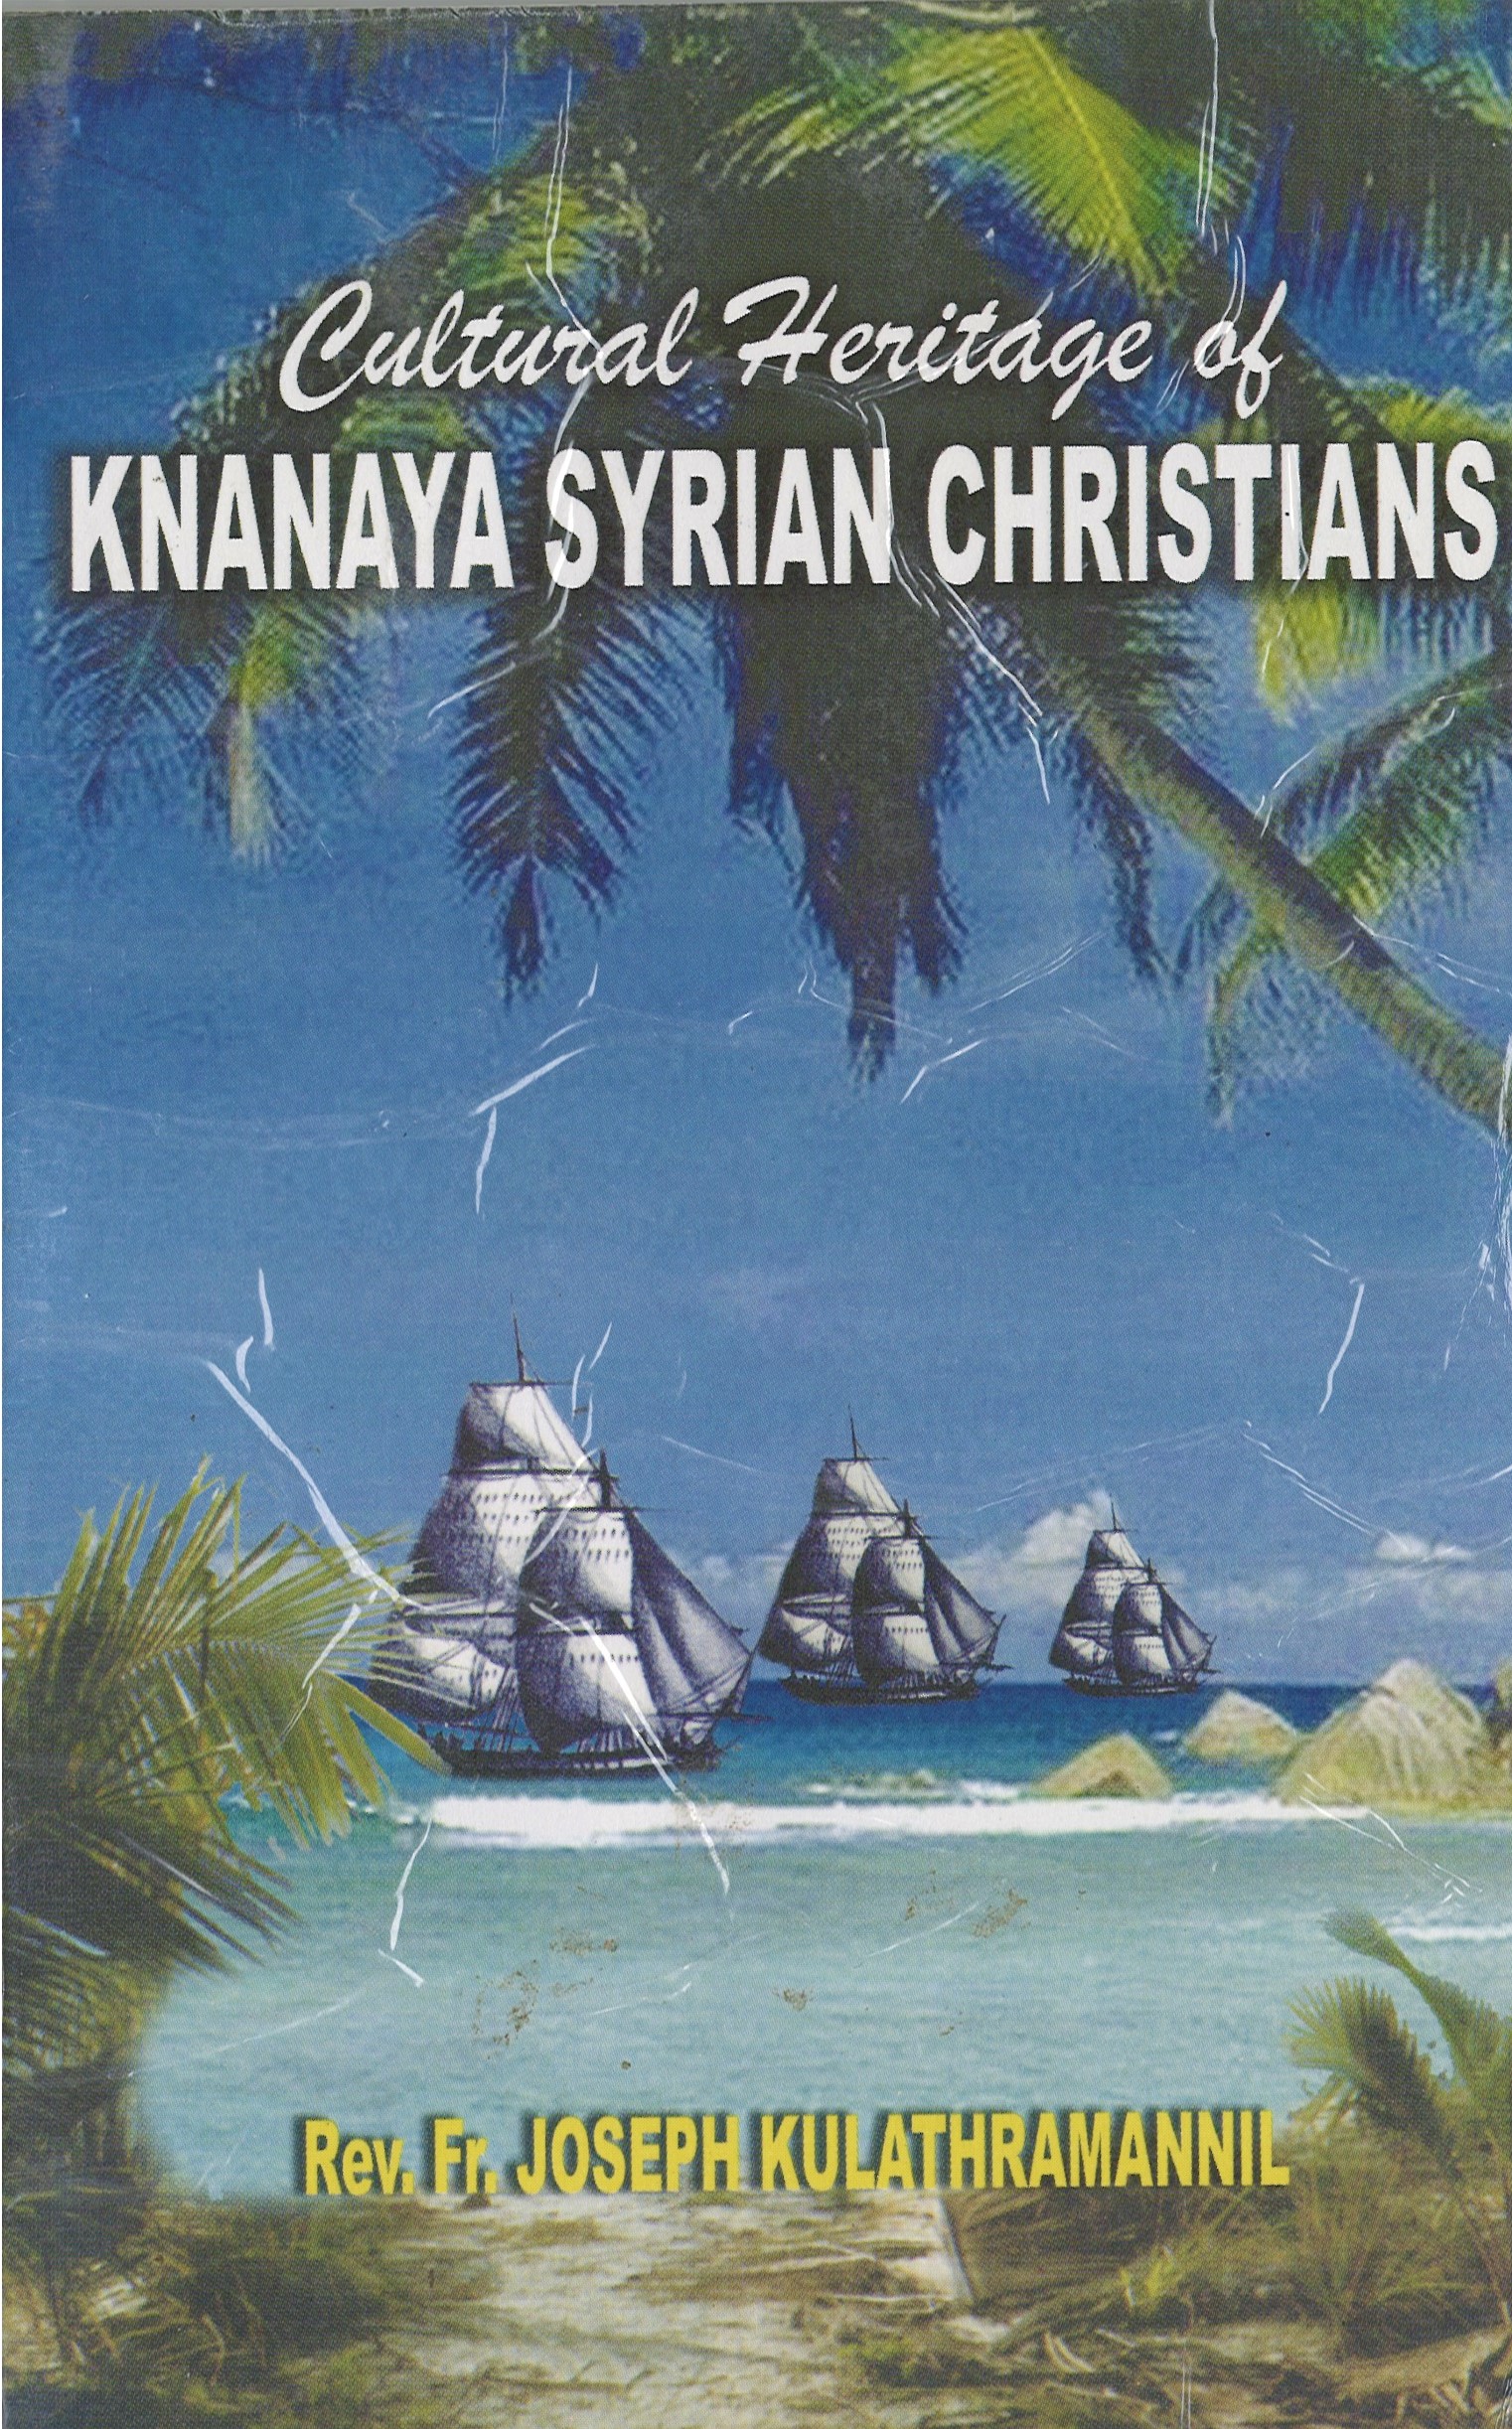 The Cultural Heritage of Knanaya Syrian Christians